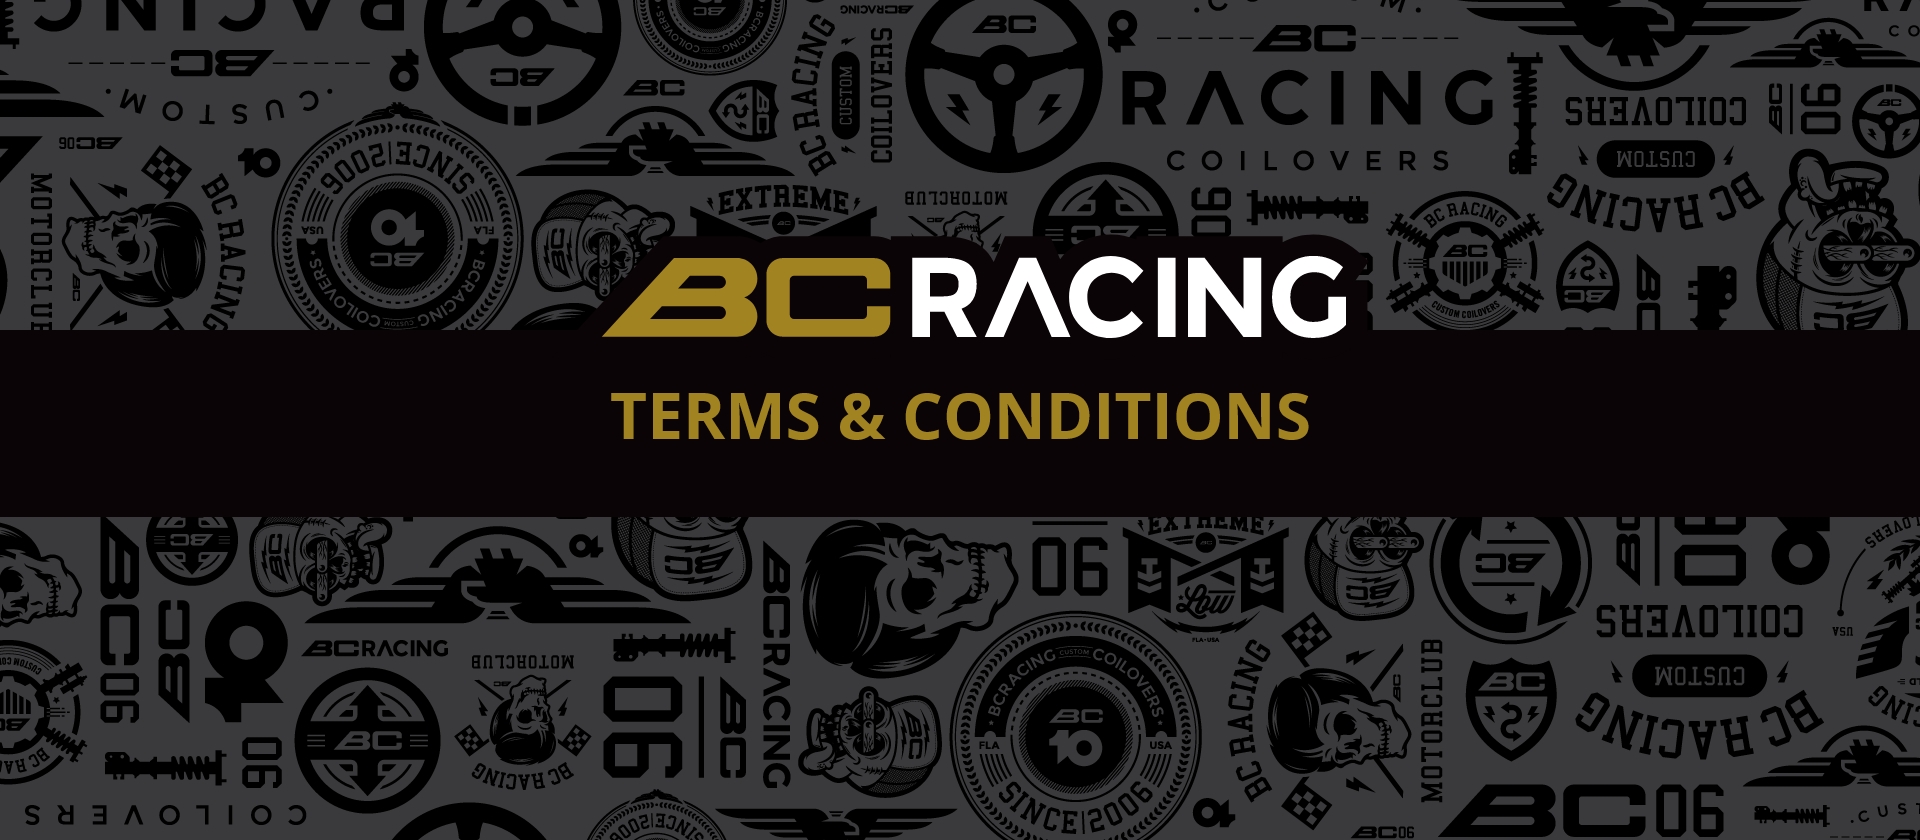 BC Racing Terms & Conditions